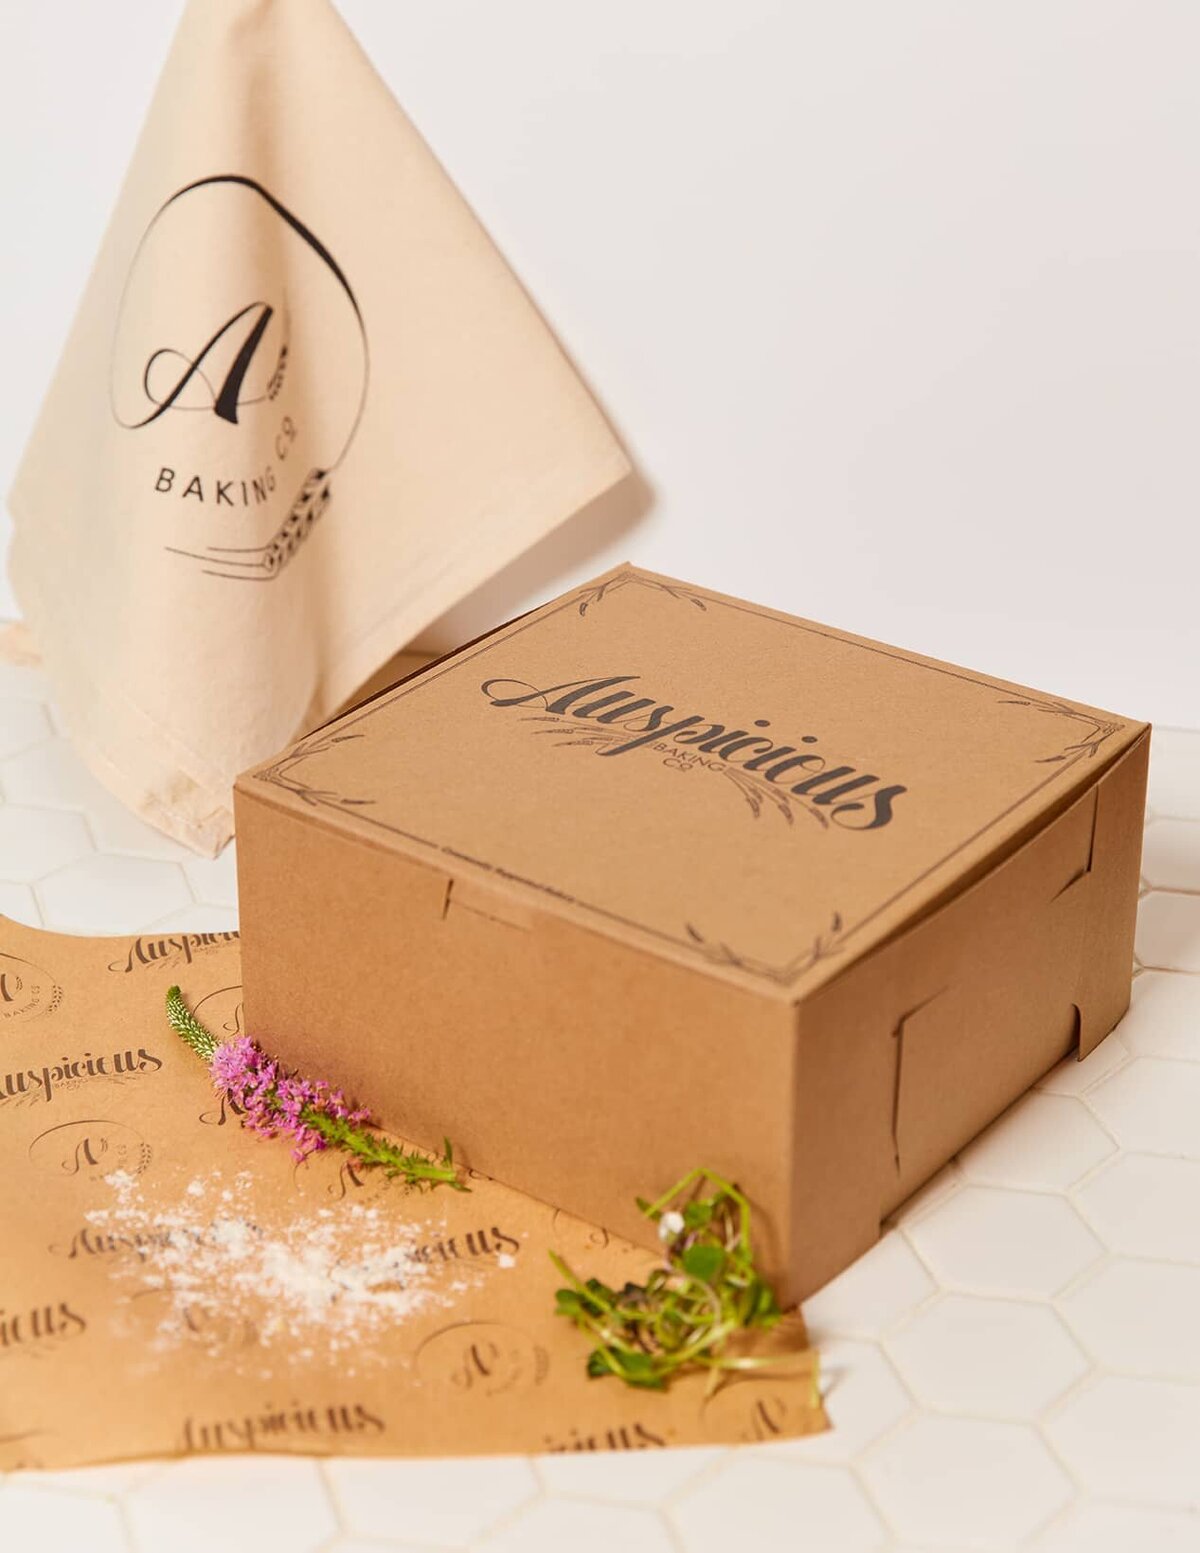 A medium-sized, brown, kraft bakery box with the Auspicious logo and custom design printed on the top